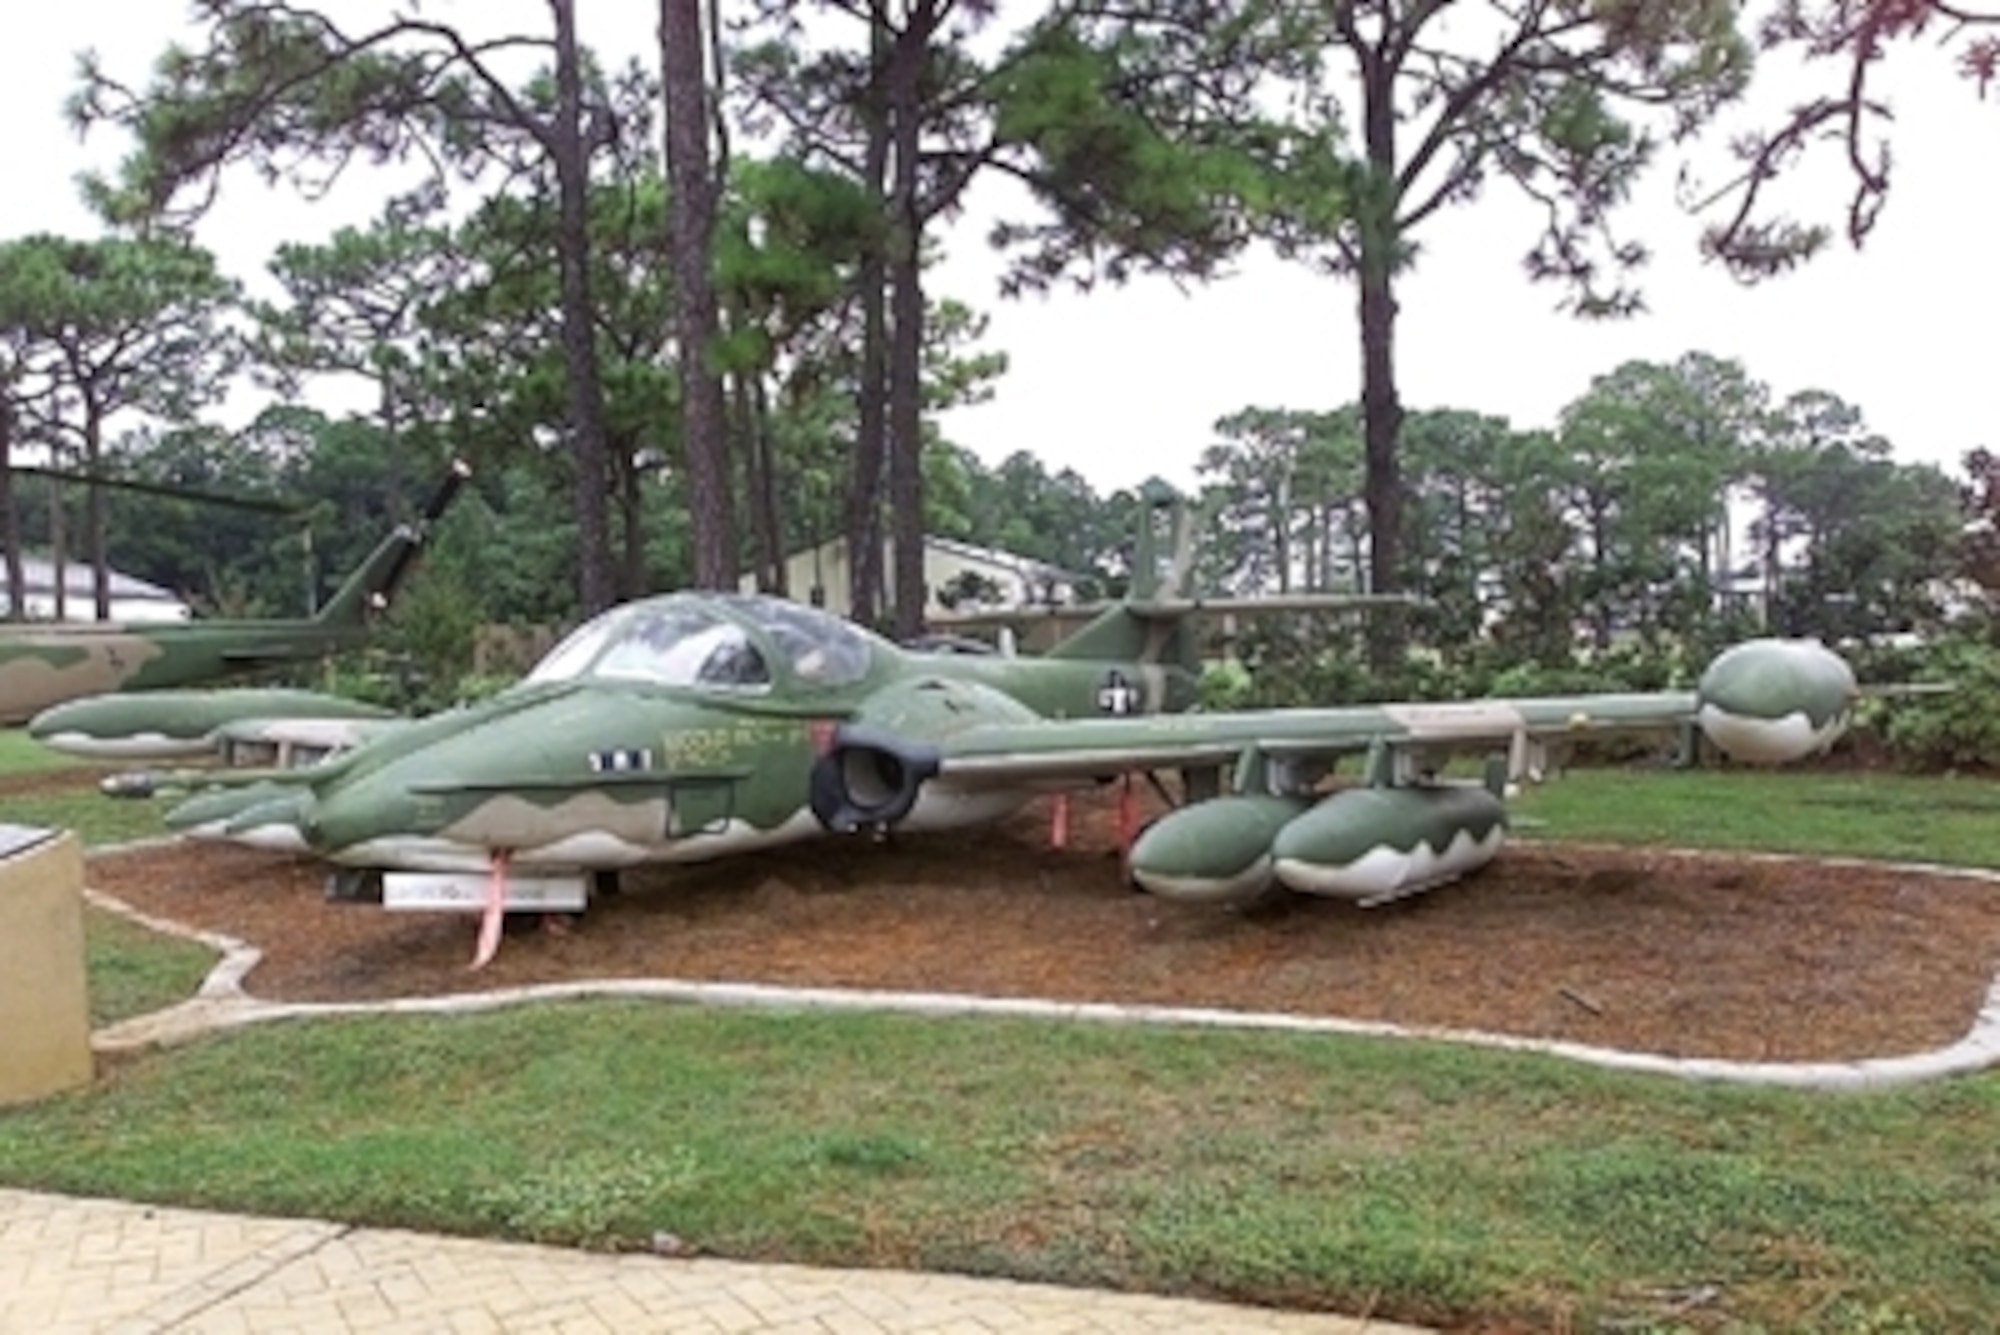 The A-37 Dragonfly was developed to encounter insurgencies and guerilla warfare and Vietnam became the ideal proving ground for this aircraft.  The 7.62 MM mini gun mounted in its nose could deliver 6,000 rounds per minute.  The Dragonfly was a modified T-37 designed to be flown by a crew of two but was normally operated by a single pilot in the left seat.  (USAF Historical Photo)   